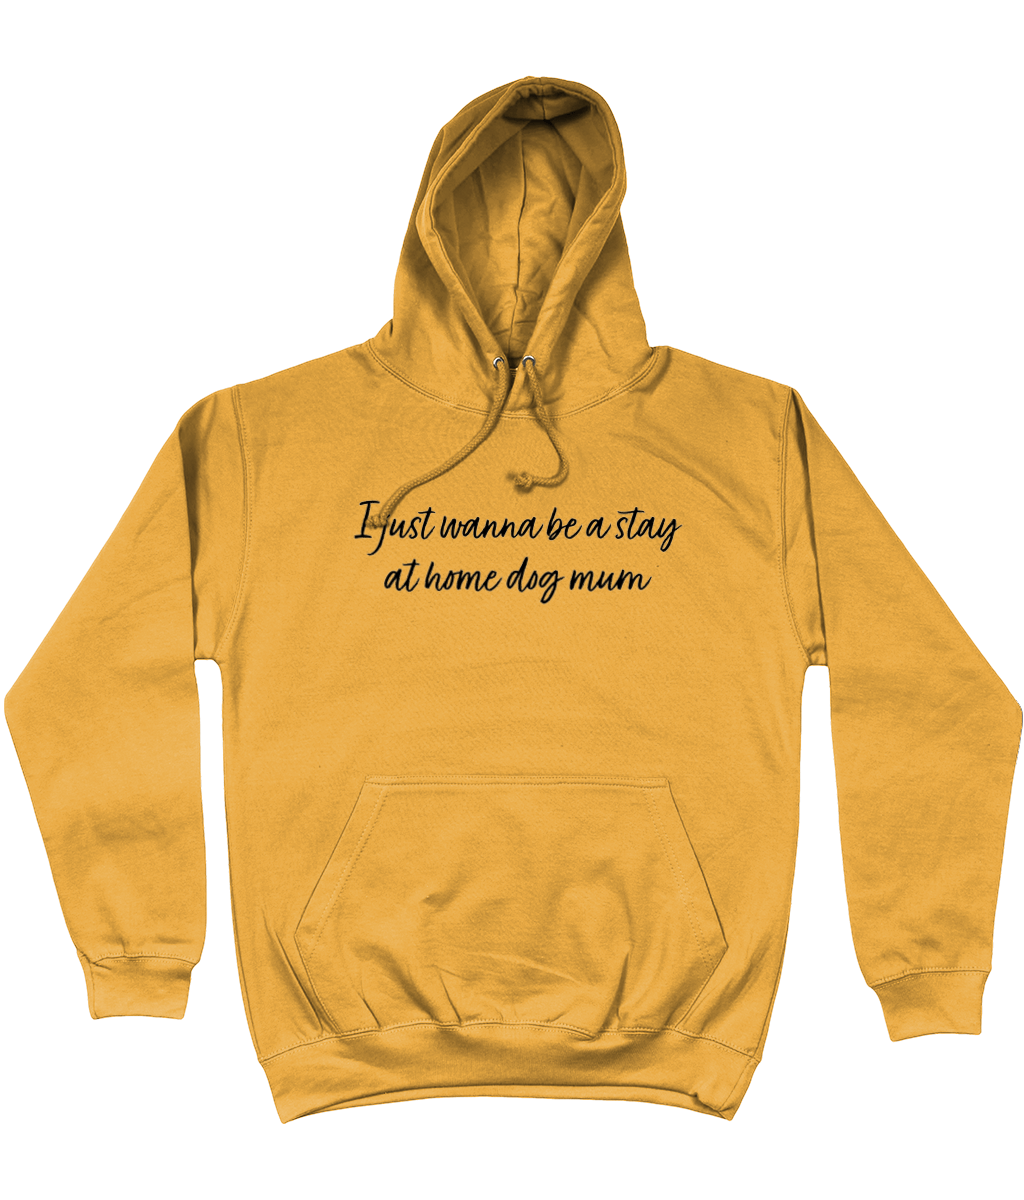 i just wanna be a stay at home dog mum hoodie